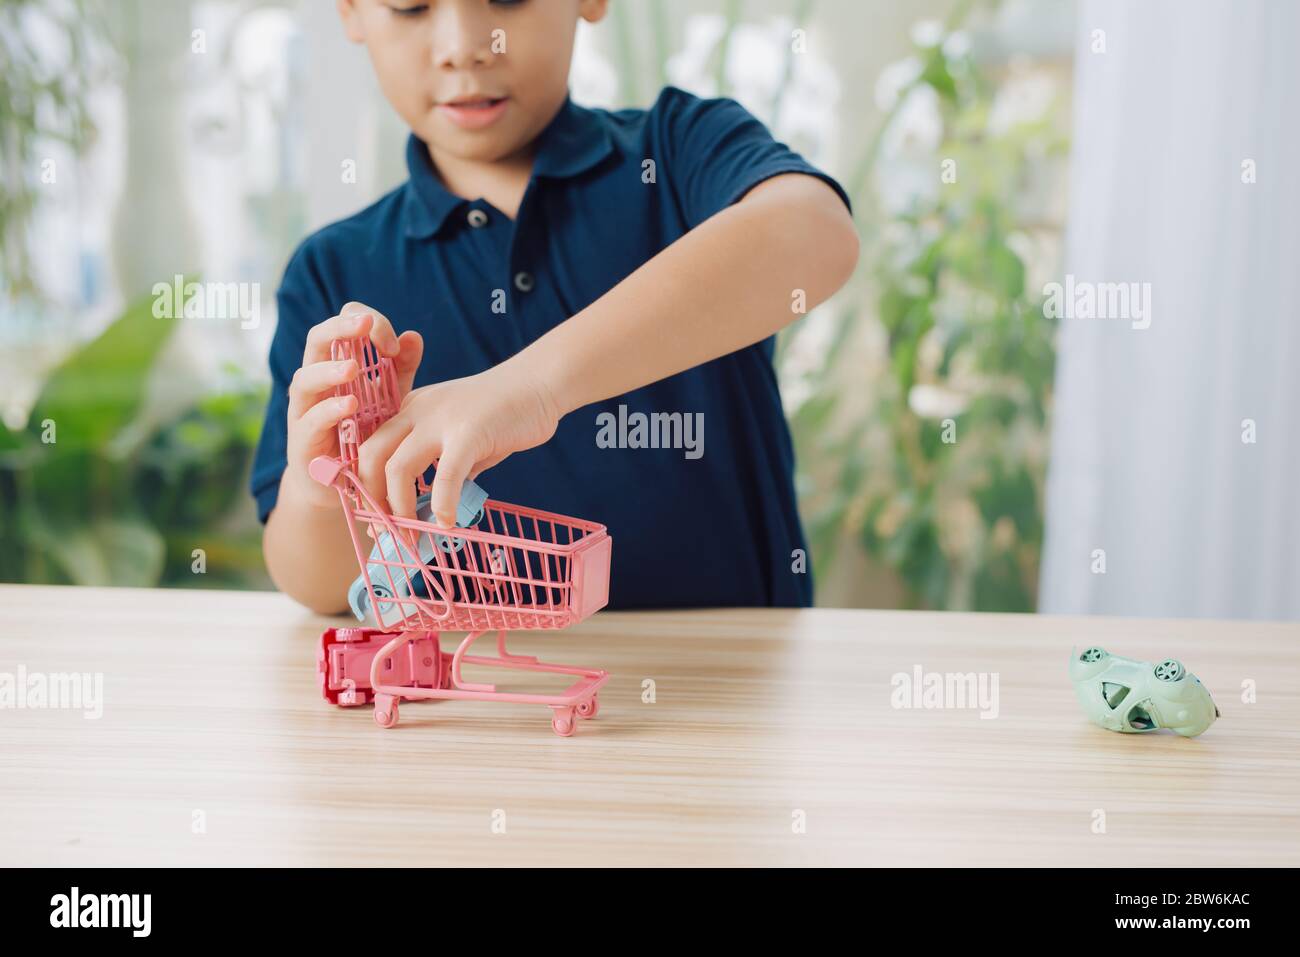 boy playing toy cars on table Stock Photo